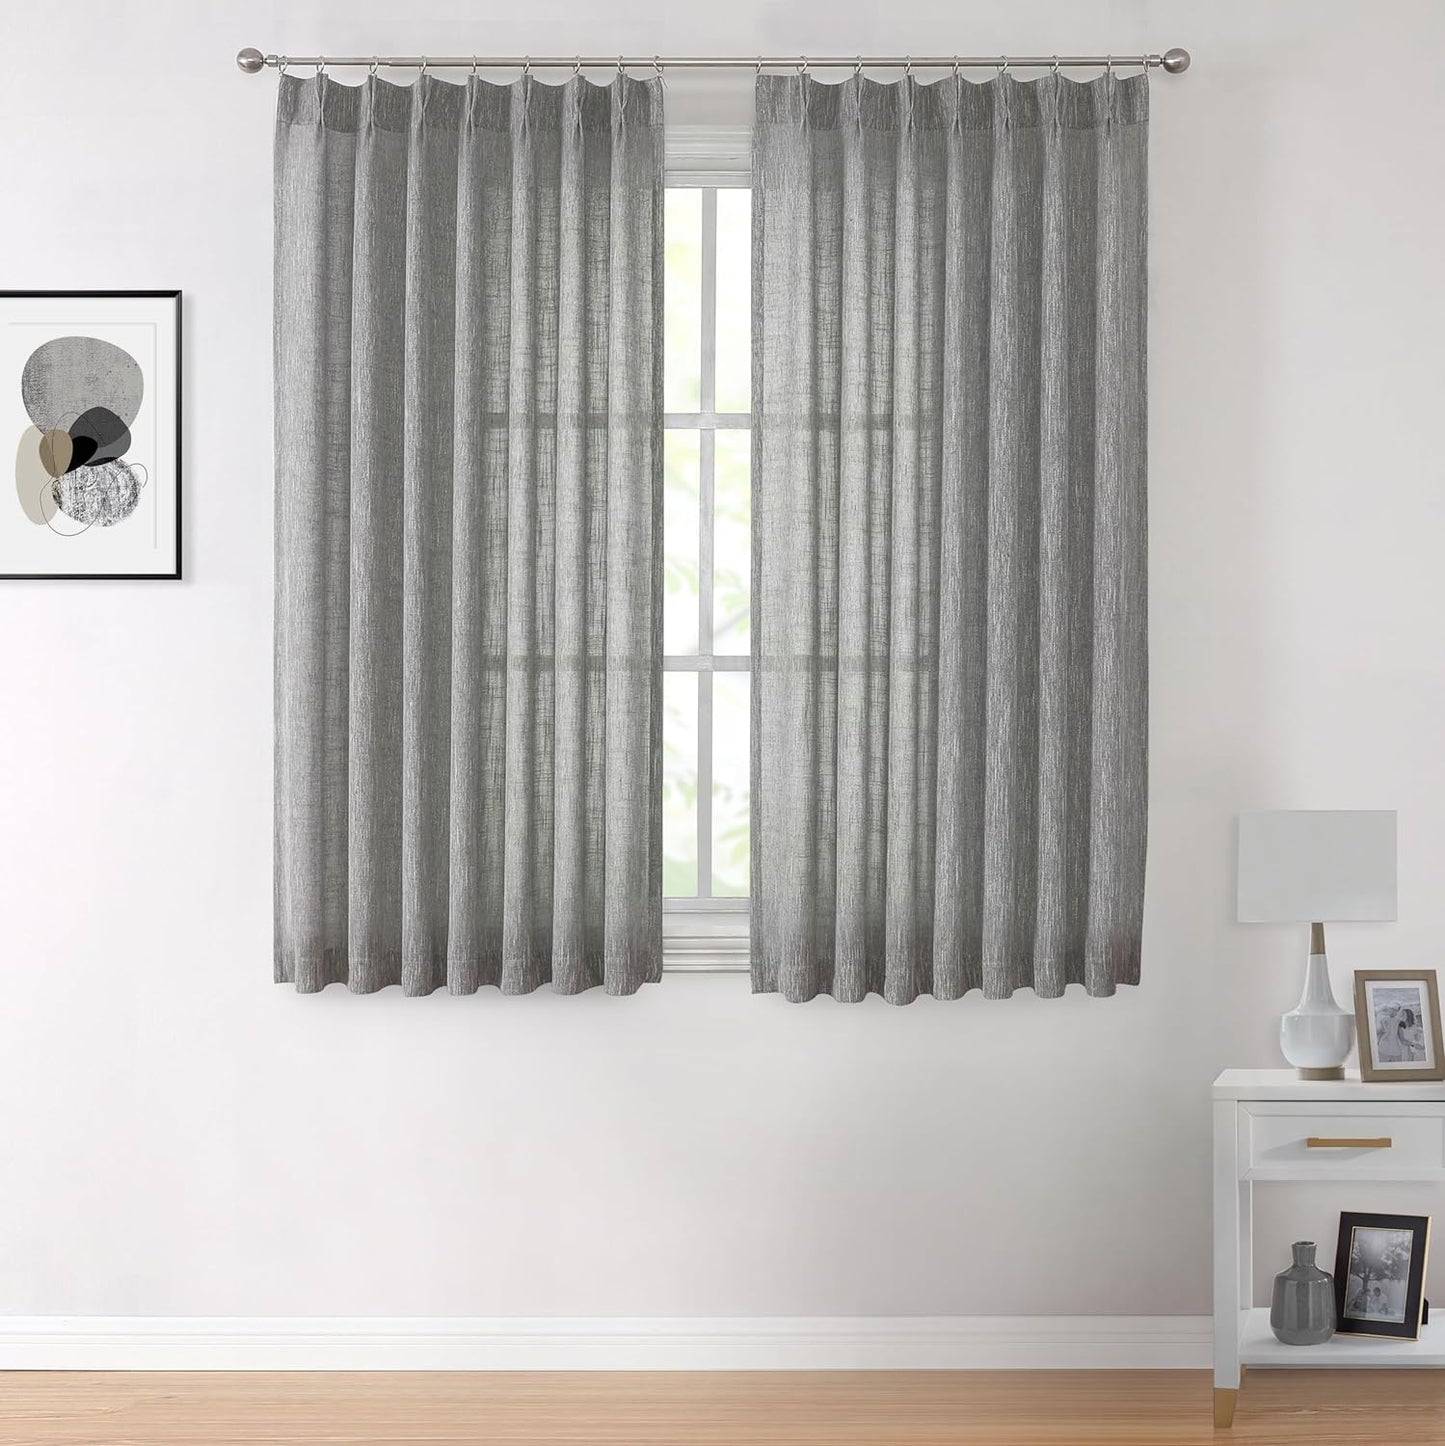 Vision Home Natural Pinch Pleated Semi Sheer Curtains Textured Linen Blended Light Filtering Window Curtains 84 Inch for Living Room Bedroom Pinch Pleat Drapes with Hooks 2 Panels 42" Wx84 L  Vision Home Charcoal Grey/Pinch 40"X63"X2 